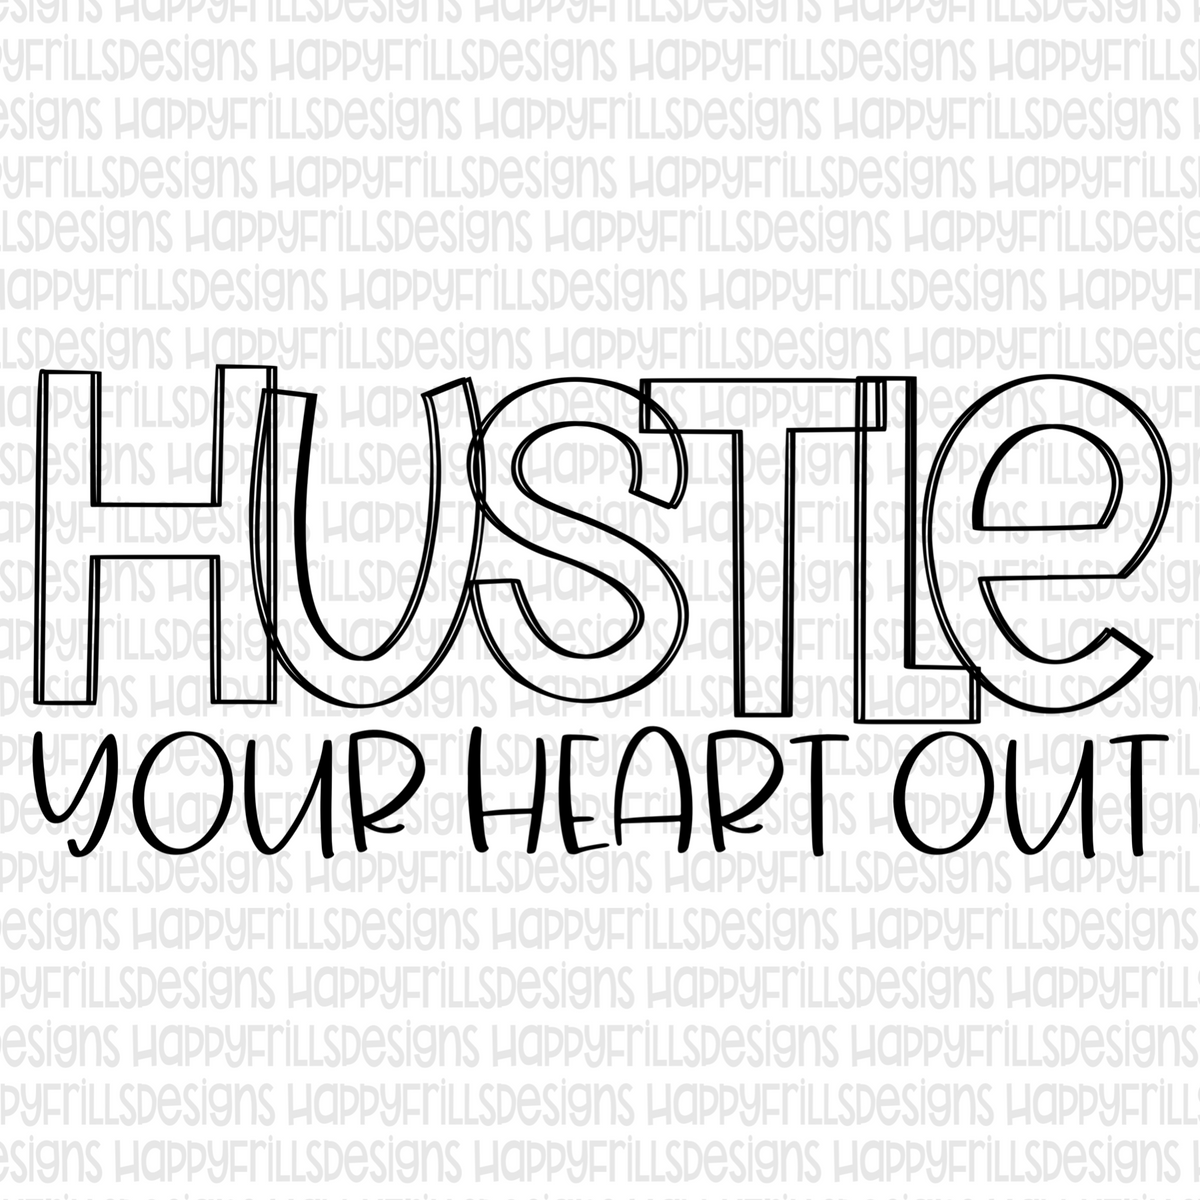 Hustle Your Heart Out Happyfrillsdesigns